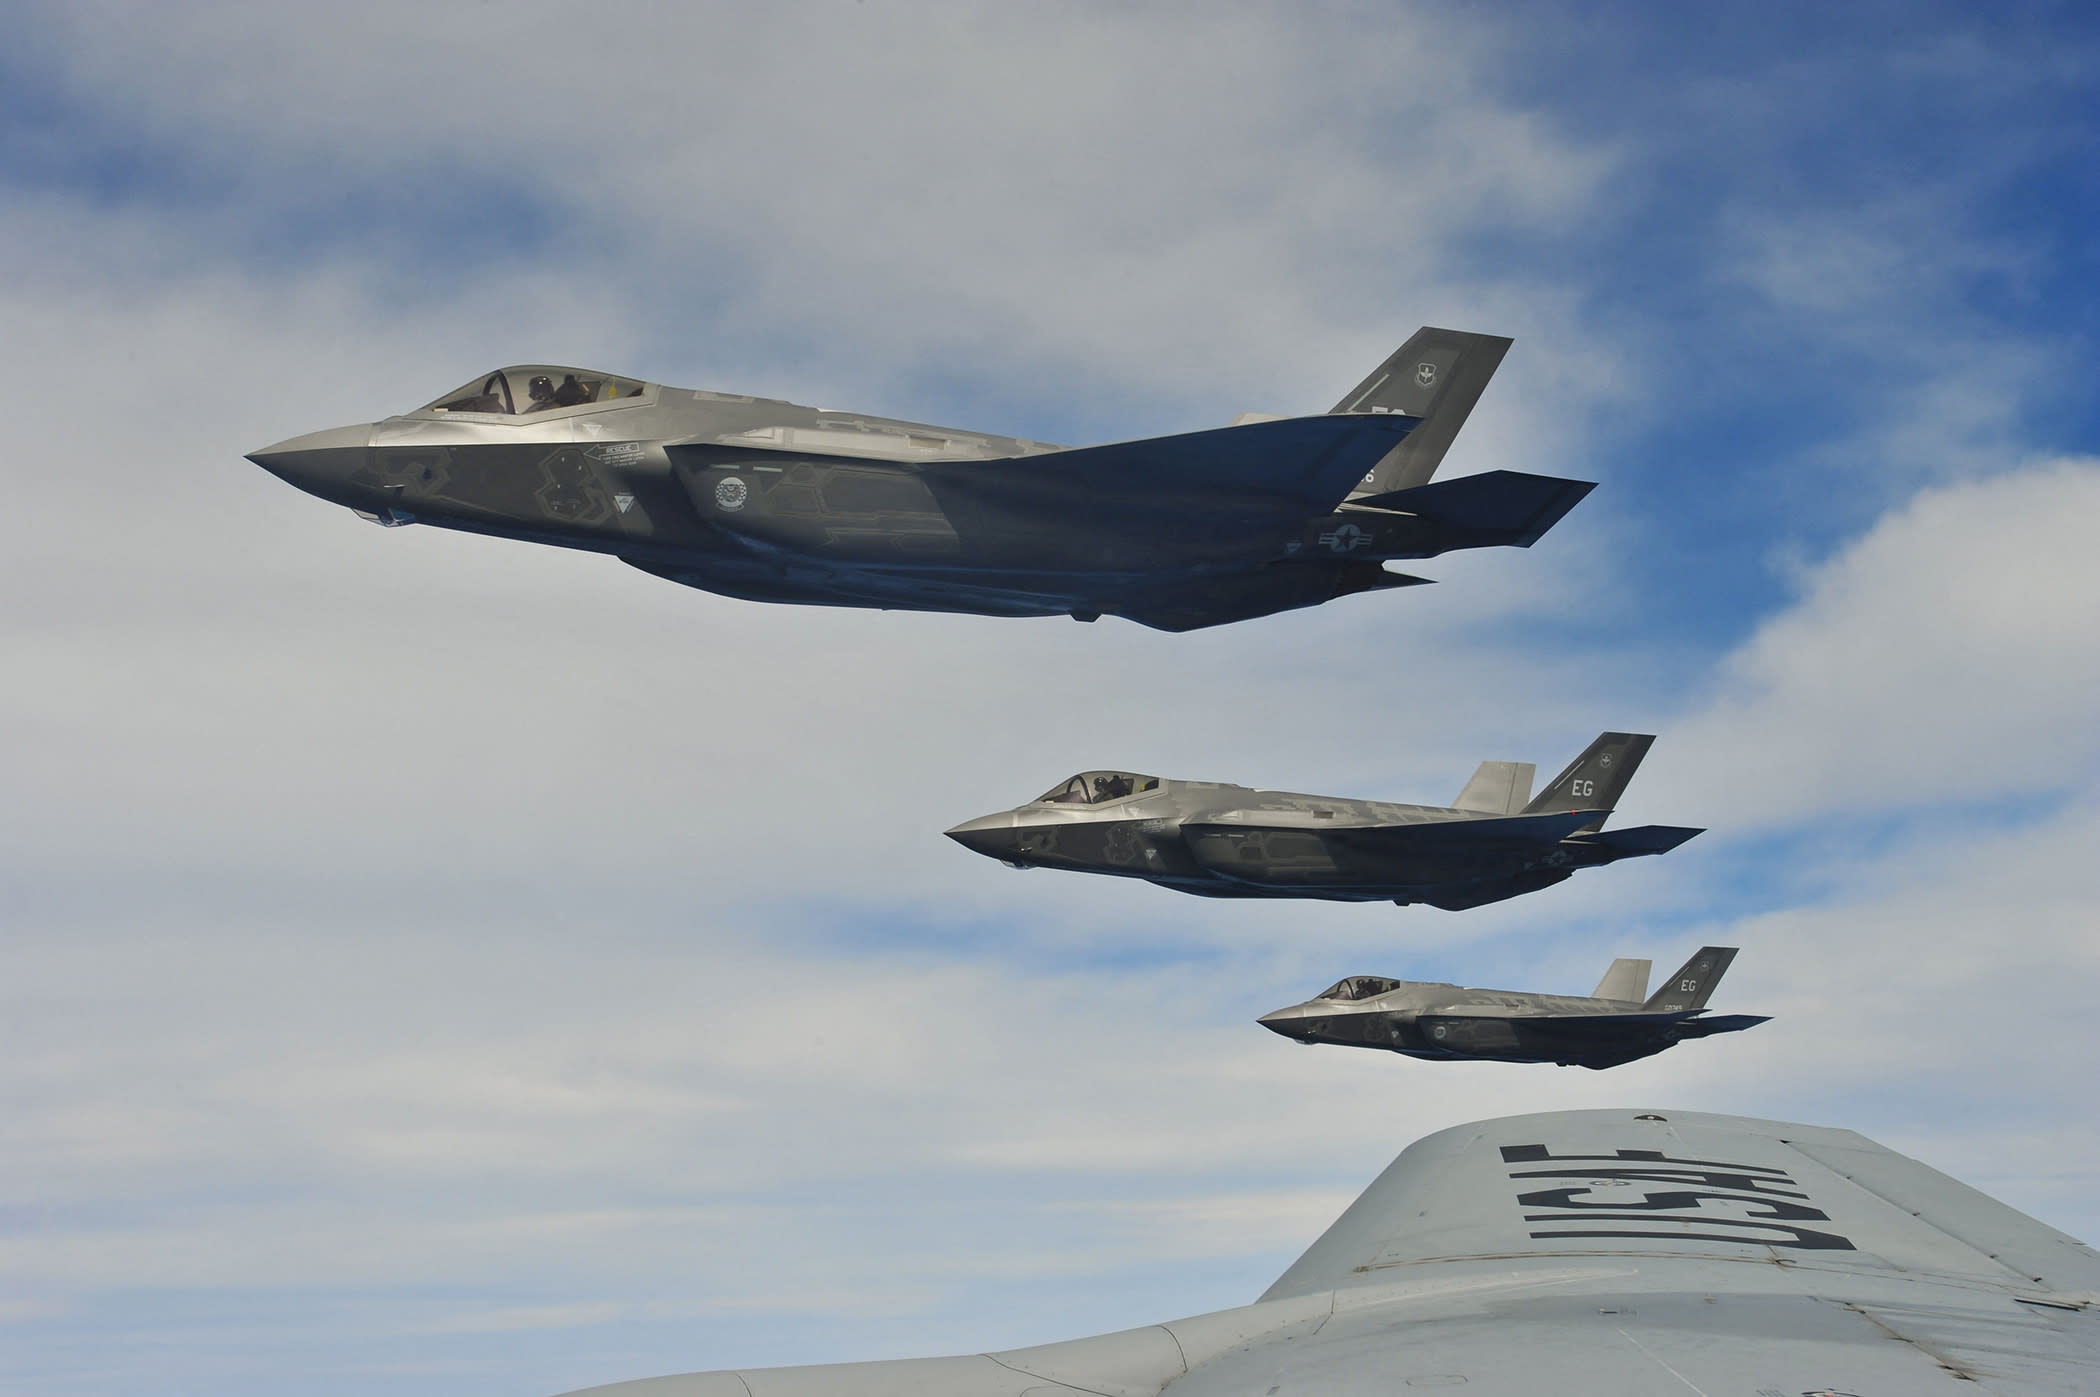 Finland signs the F-35 fighter jet